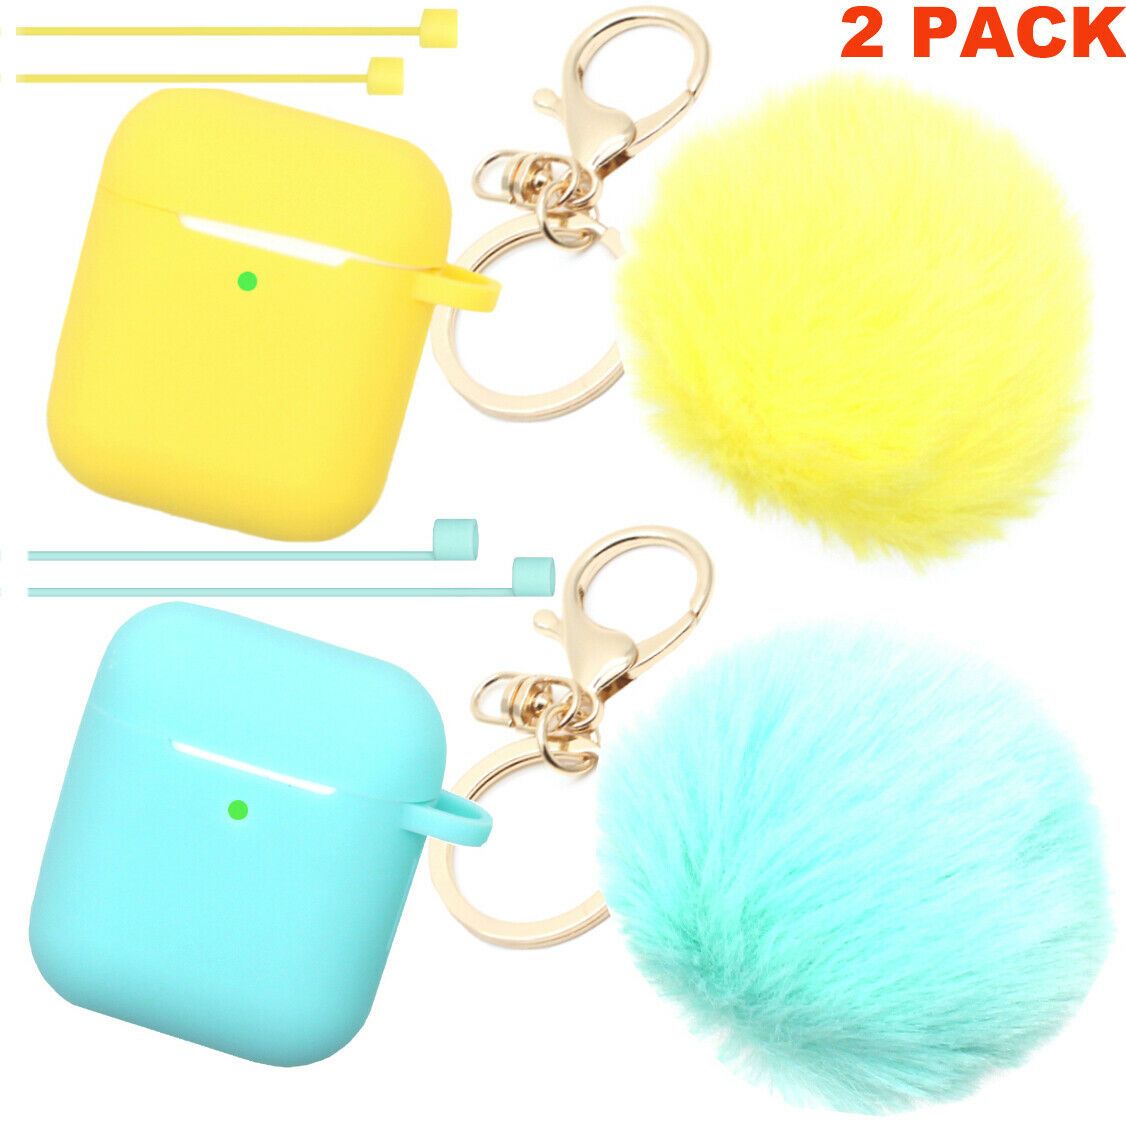 Cute Airpods Silicone Case Cover w/Fur Ball Keychain Strap for Apple Airpods 1/2 ervin.accessories Yellow+Mint (2 Pack) 